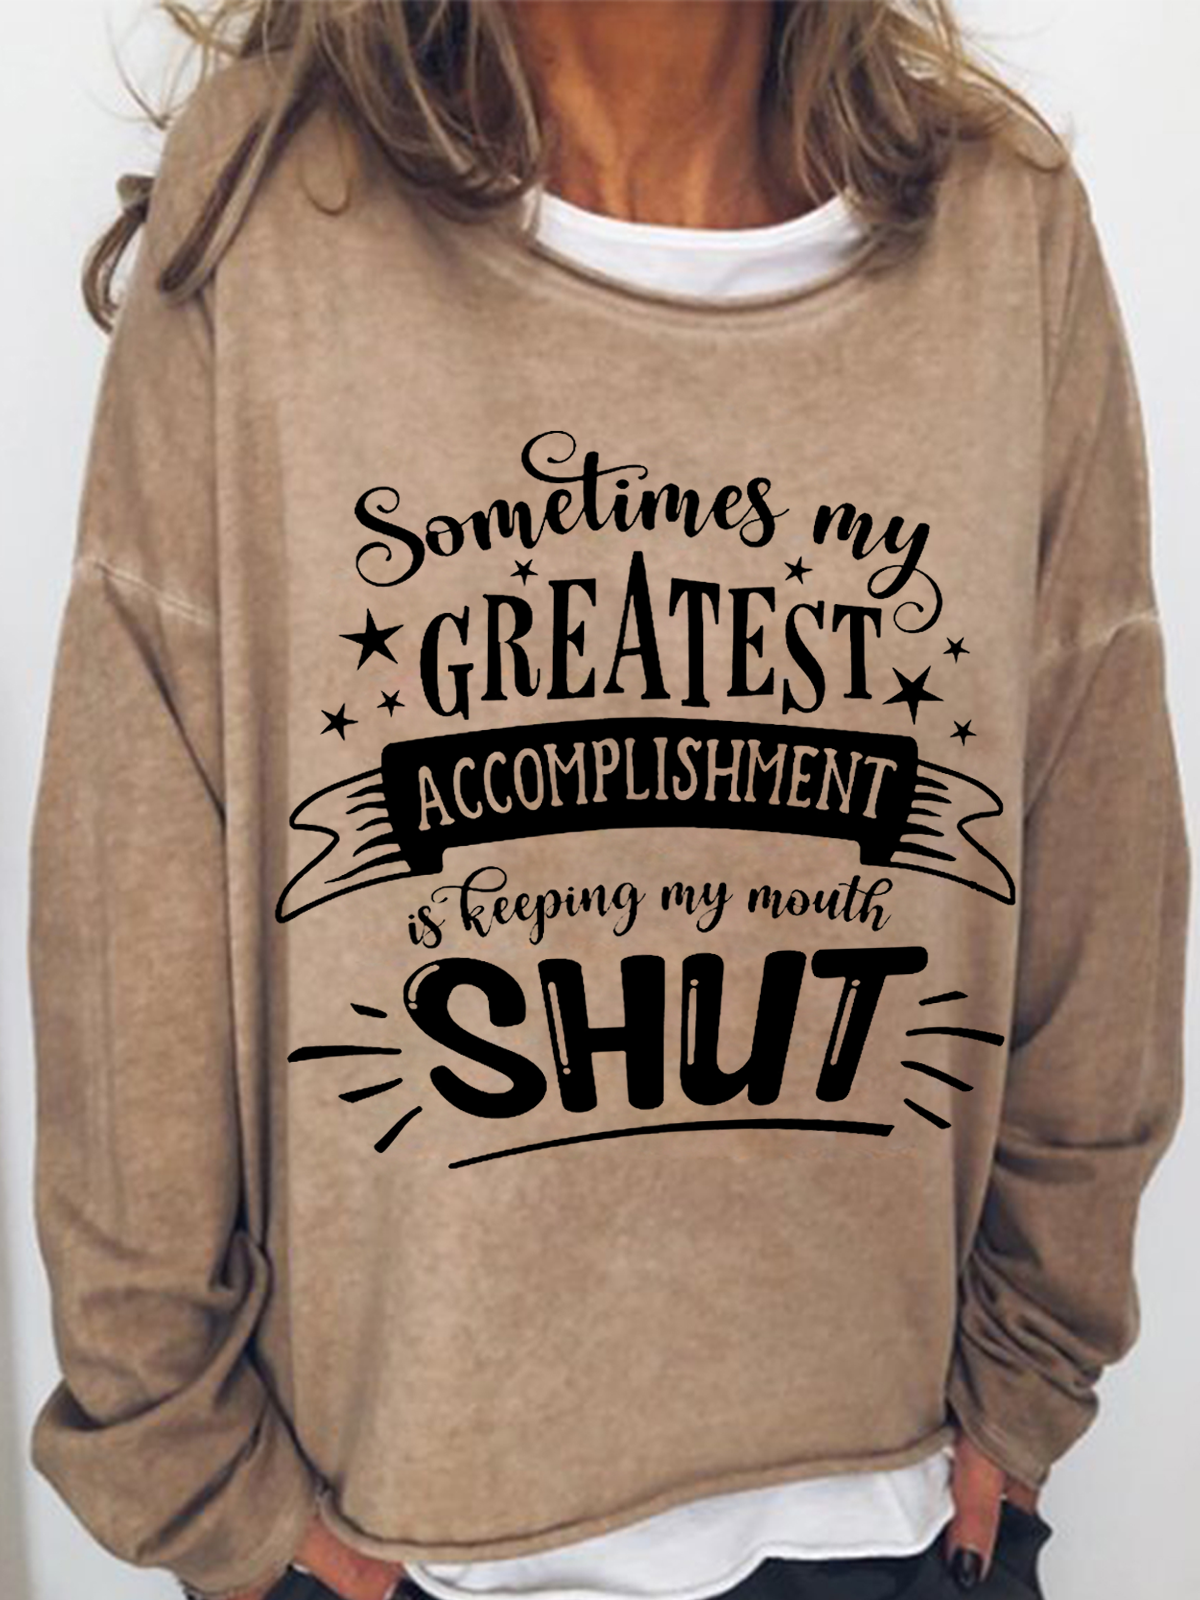 Women's Sarcastic Sometimes My Greatest Accomplishment is Keeping My Mouth Shut Cotton-Blend Casual Text Letters Sweatshirt